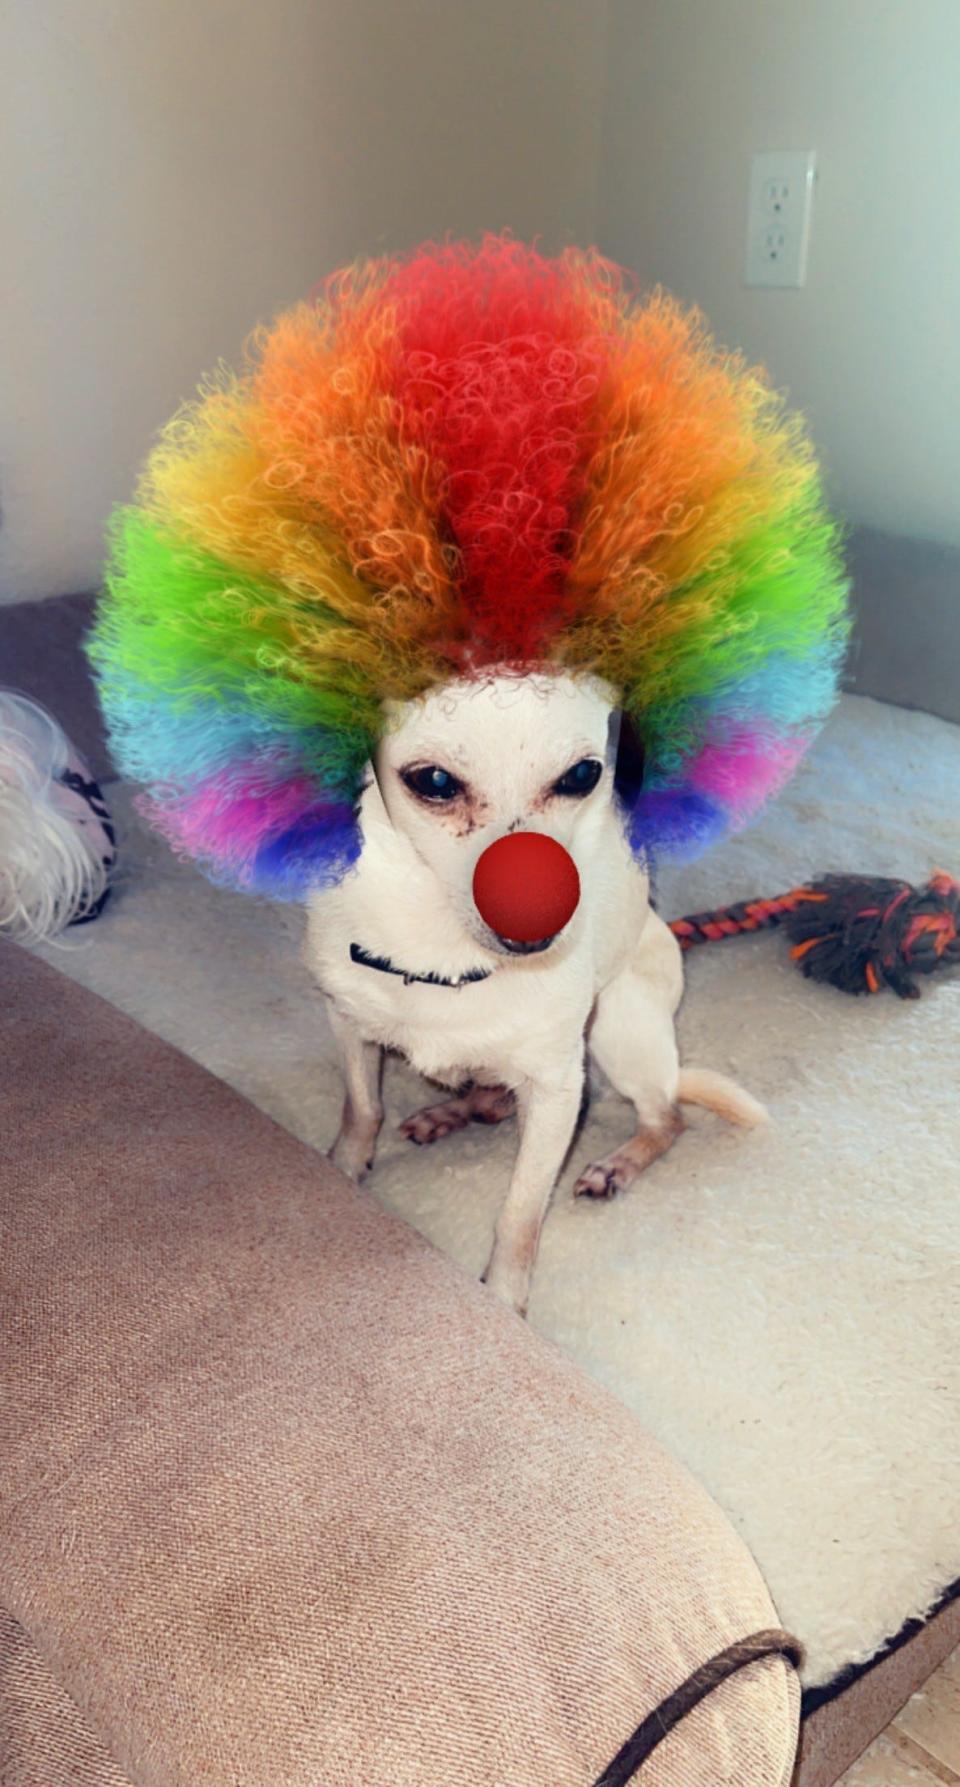 TobyKeith, a 21-year-old chihuahua in Greenacres, Florida, is once again the world's oldest living dog, Guinness World Records says. Here he is representing LGBTQ Pride Month.